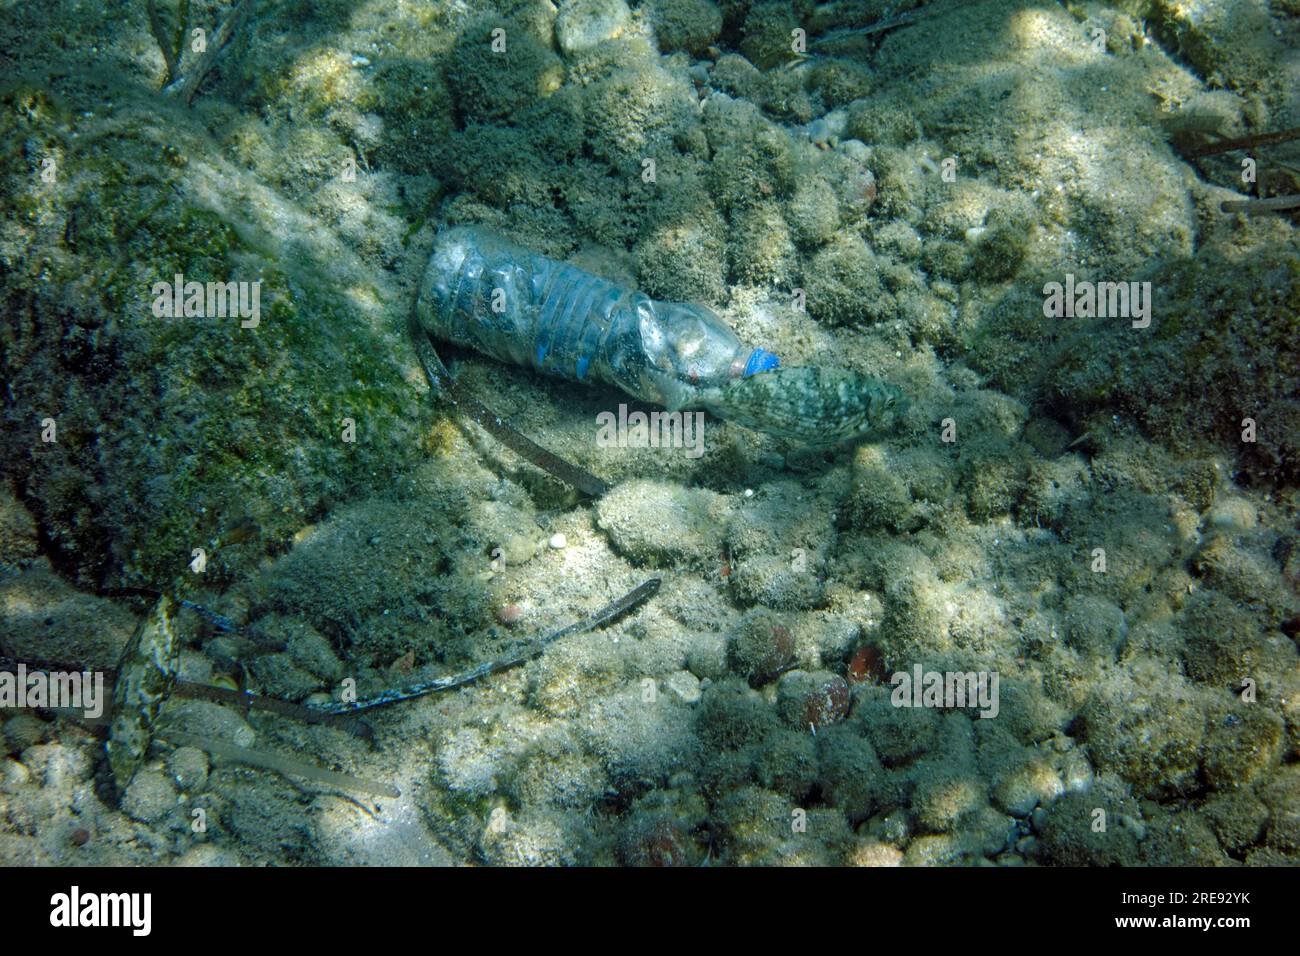 Empty plastic water bottle on sea bed, Tilos, Dodecanese Islands, Southern Aegean, Greece. Stock Photo